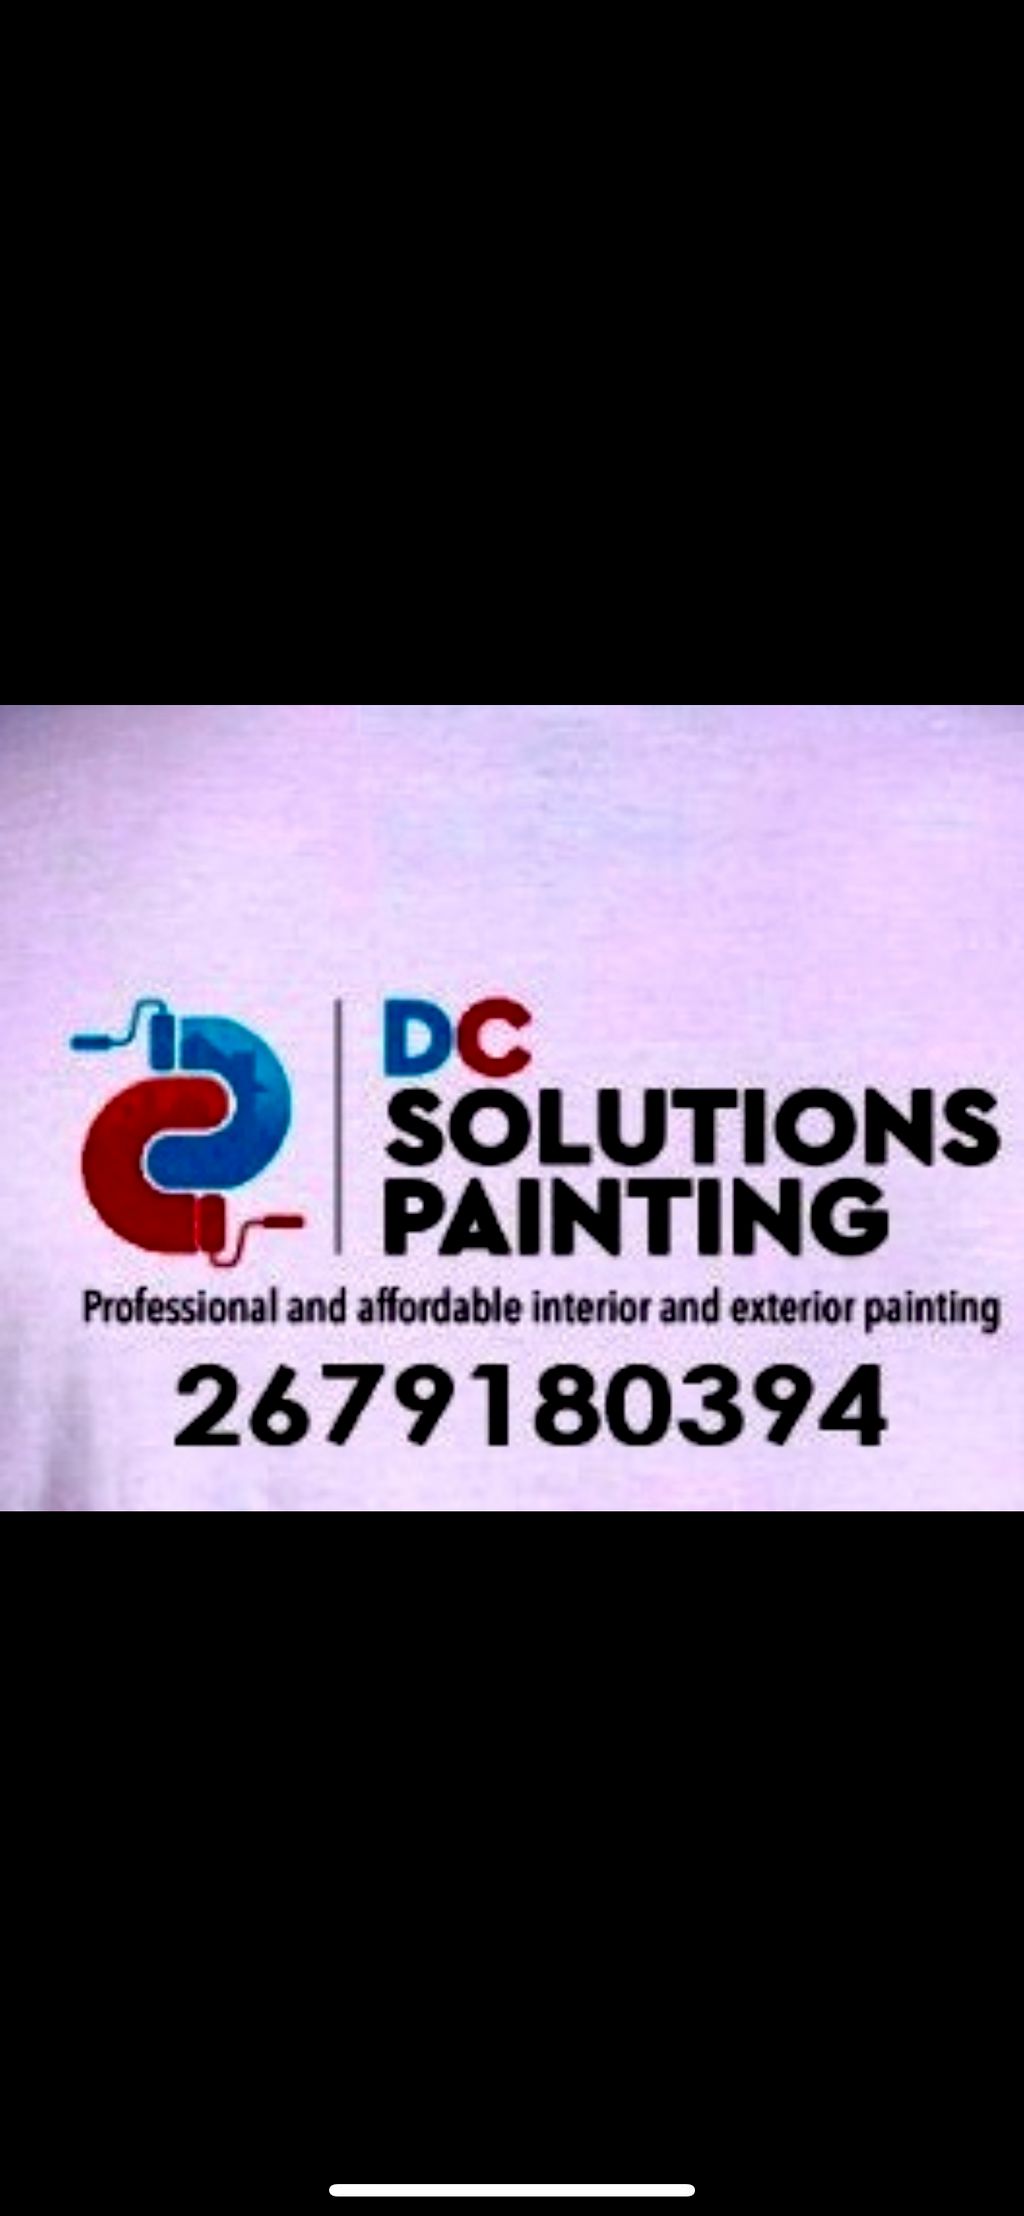 DC Solutions Painting inc